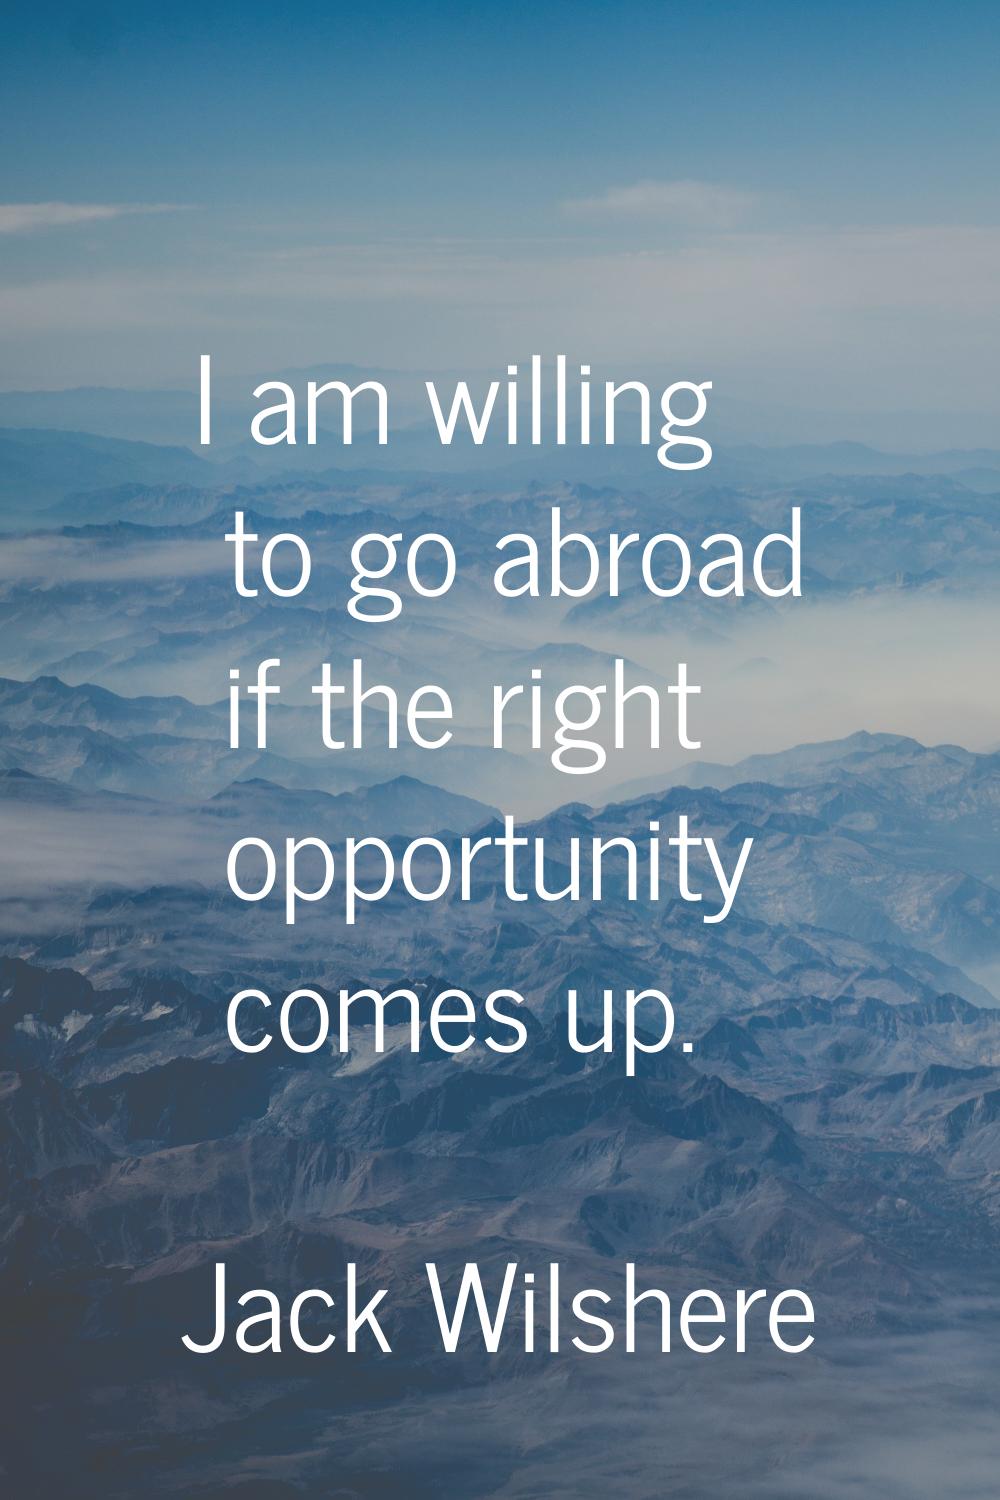 I am willing to go abroad if the right opportunity comes up.